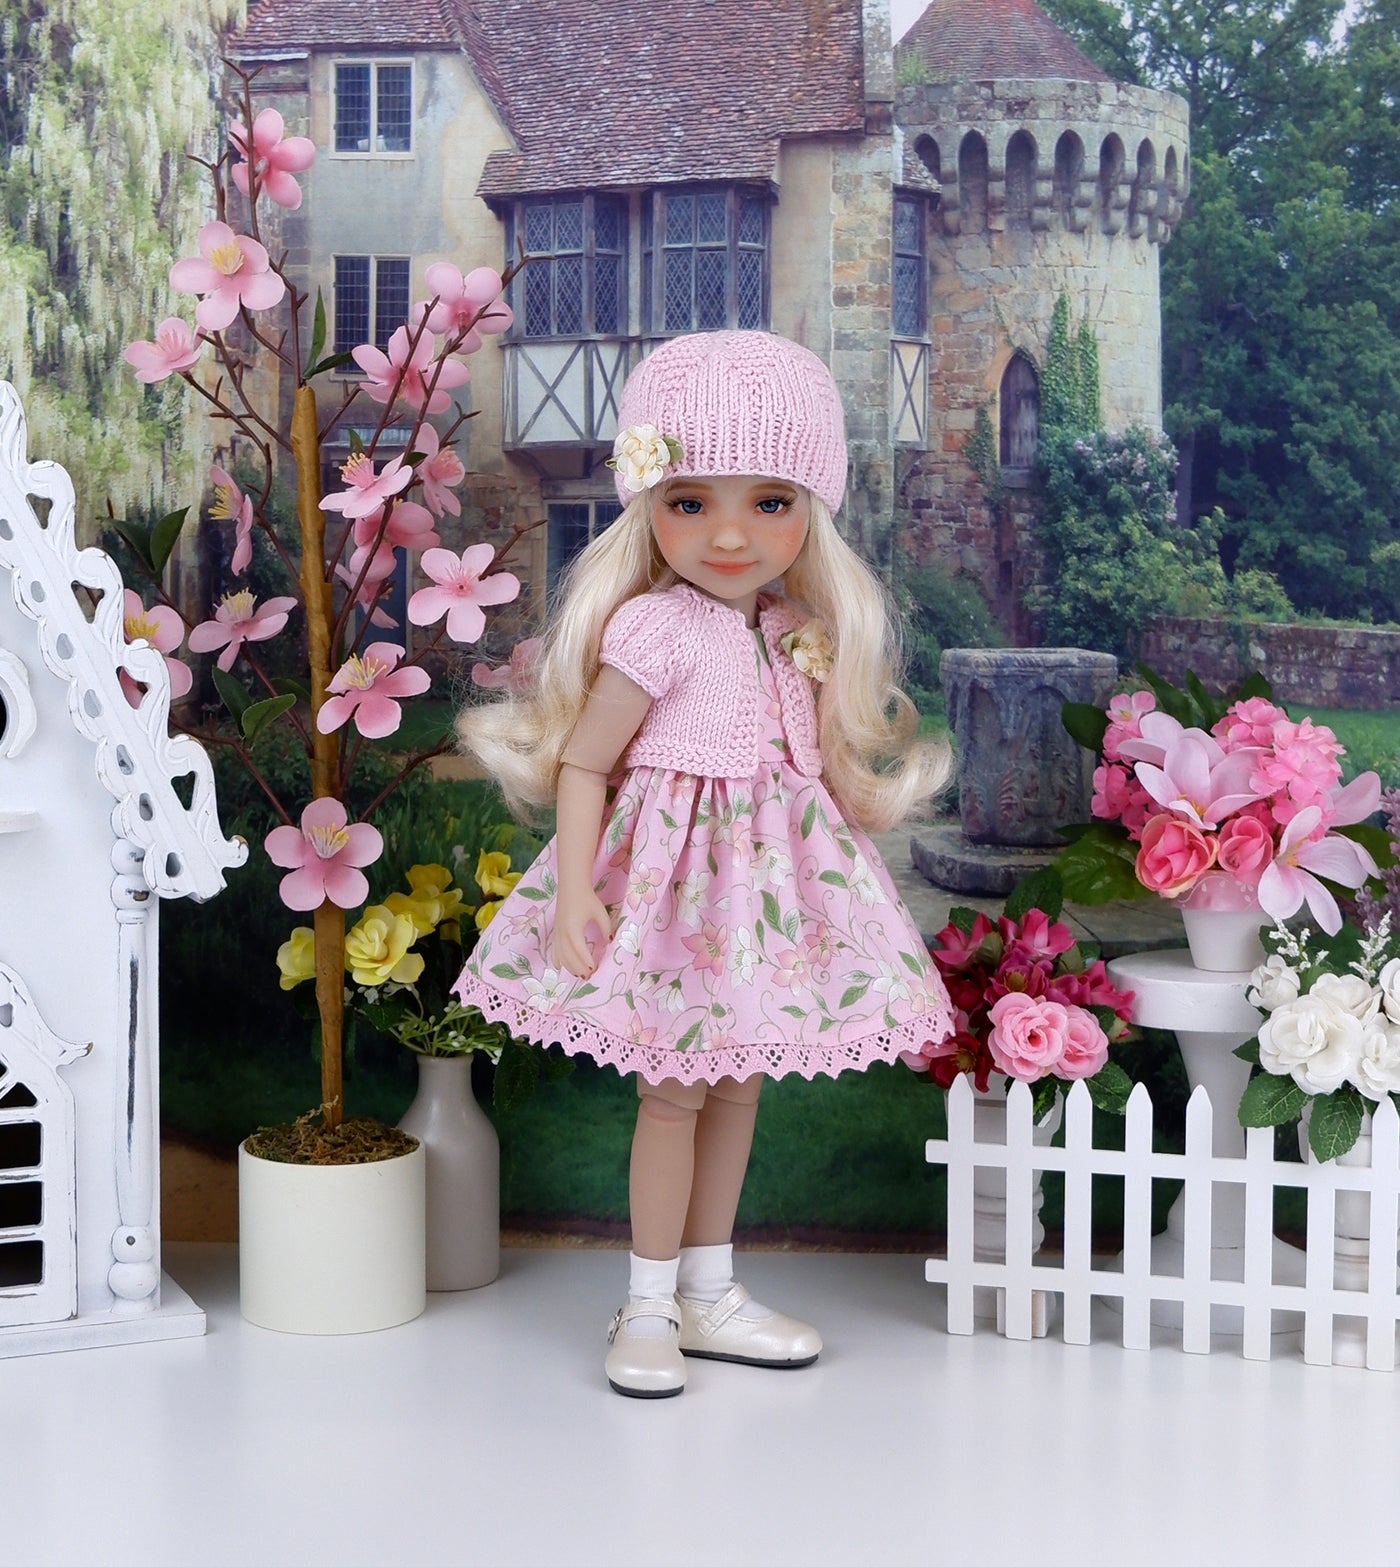 Spring Clematis - dress and sweater set with shoes for Ruby Red Fashion Friends doll